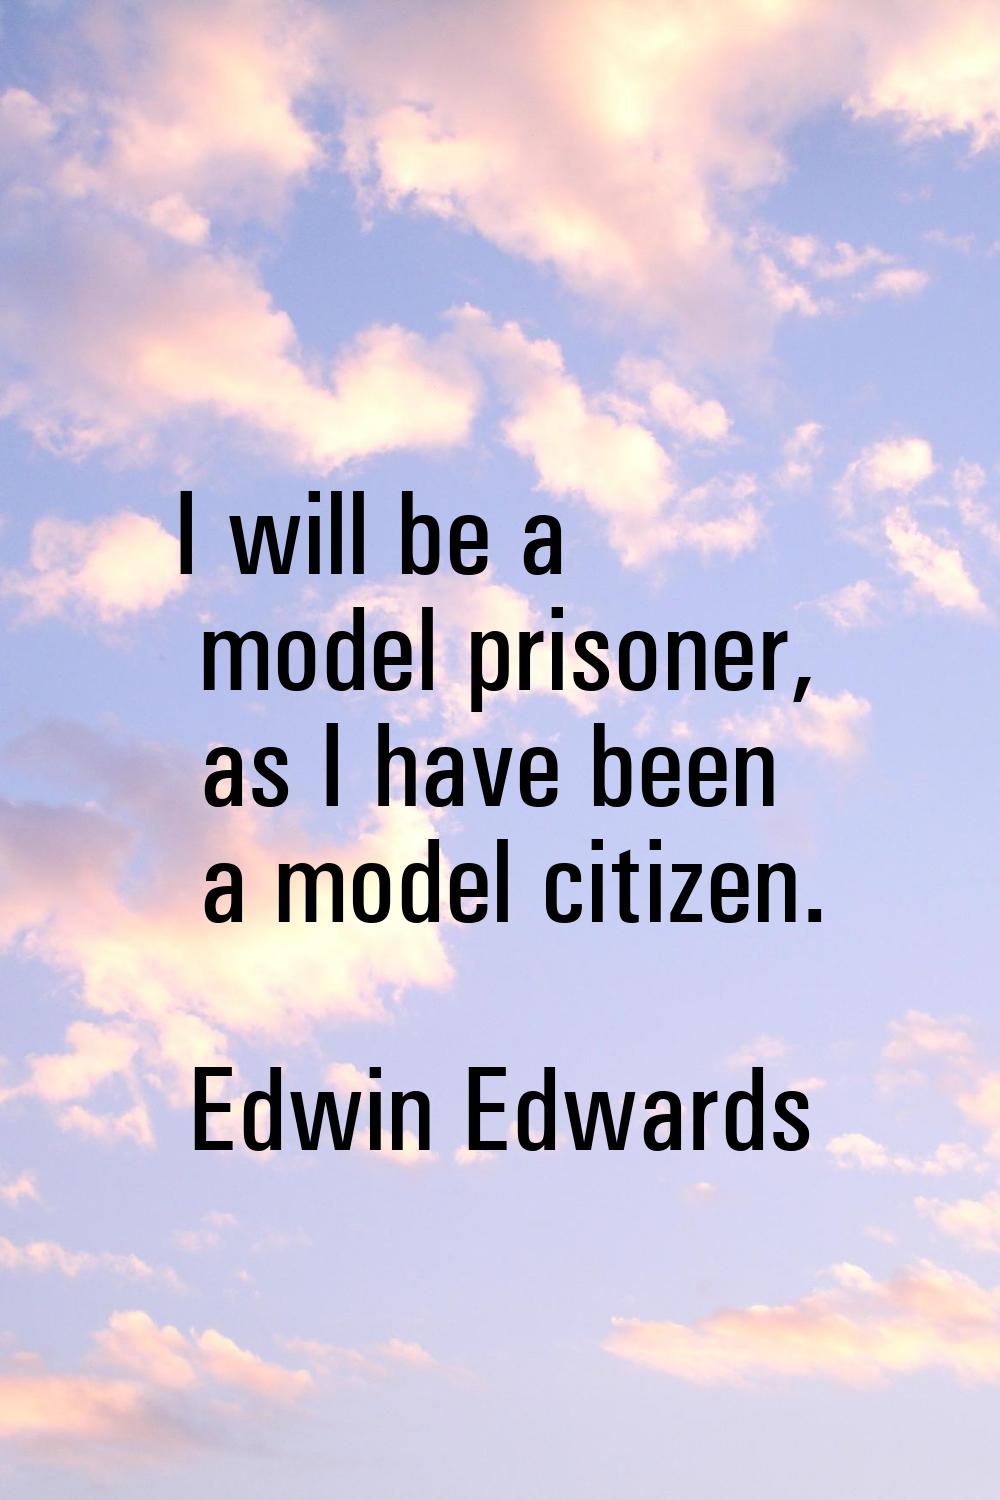 I will be a model prisoner, as I have been a model citizen.